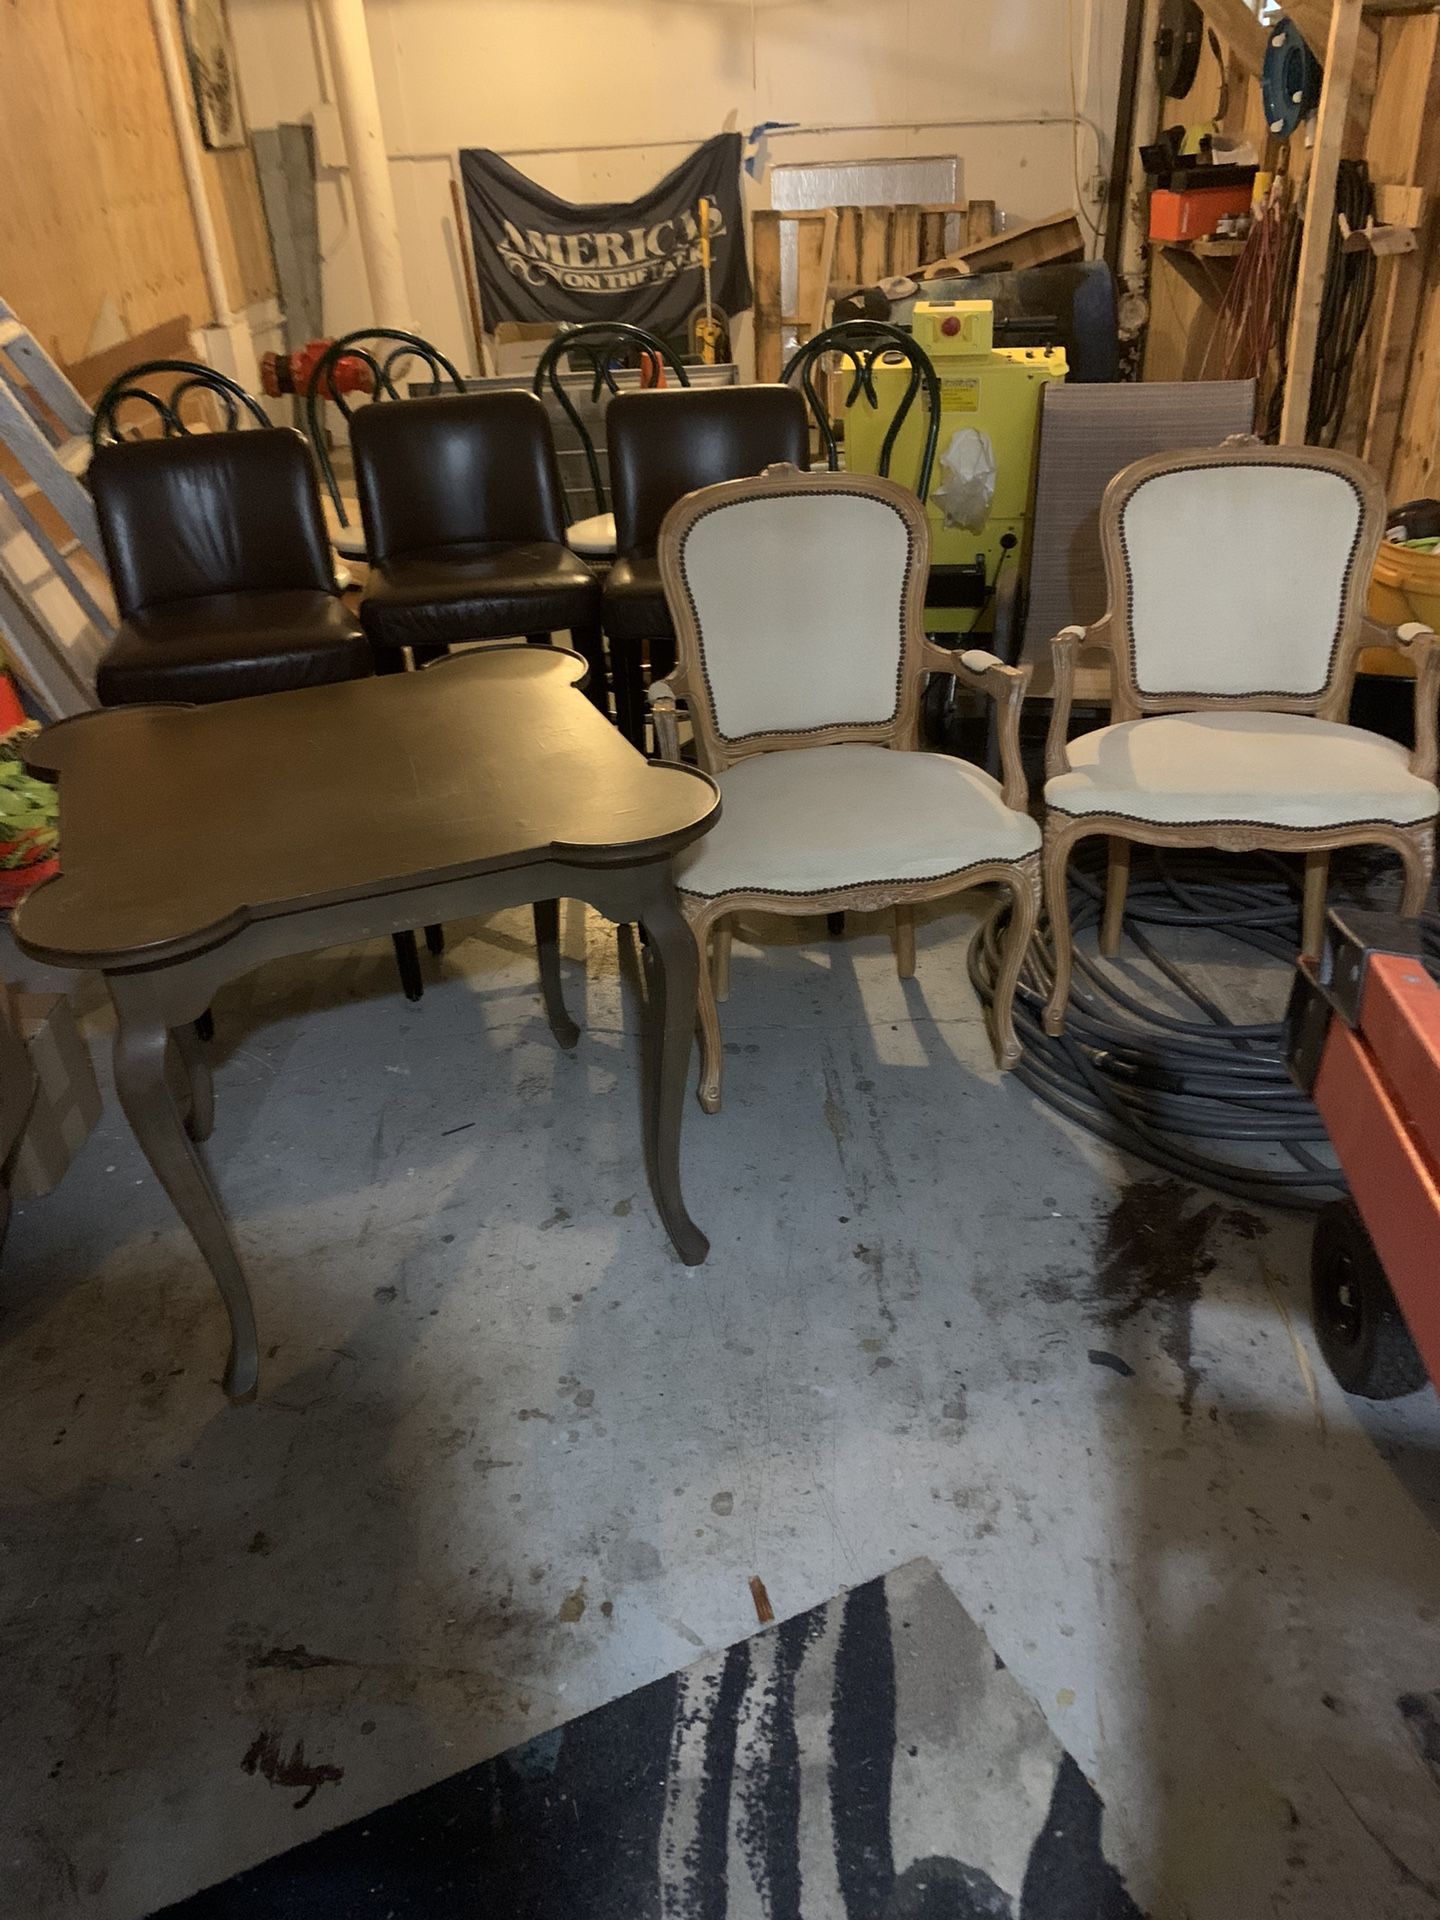 Used Barstools And Chairs